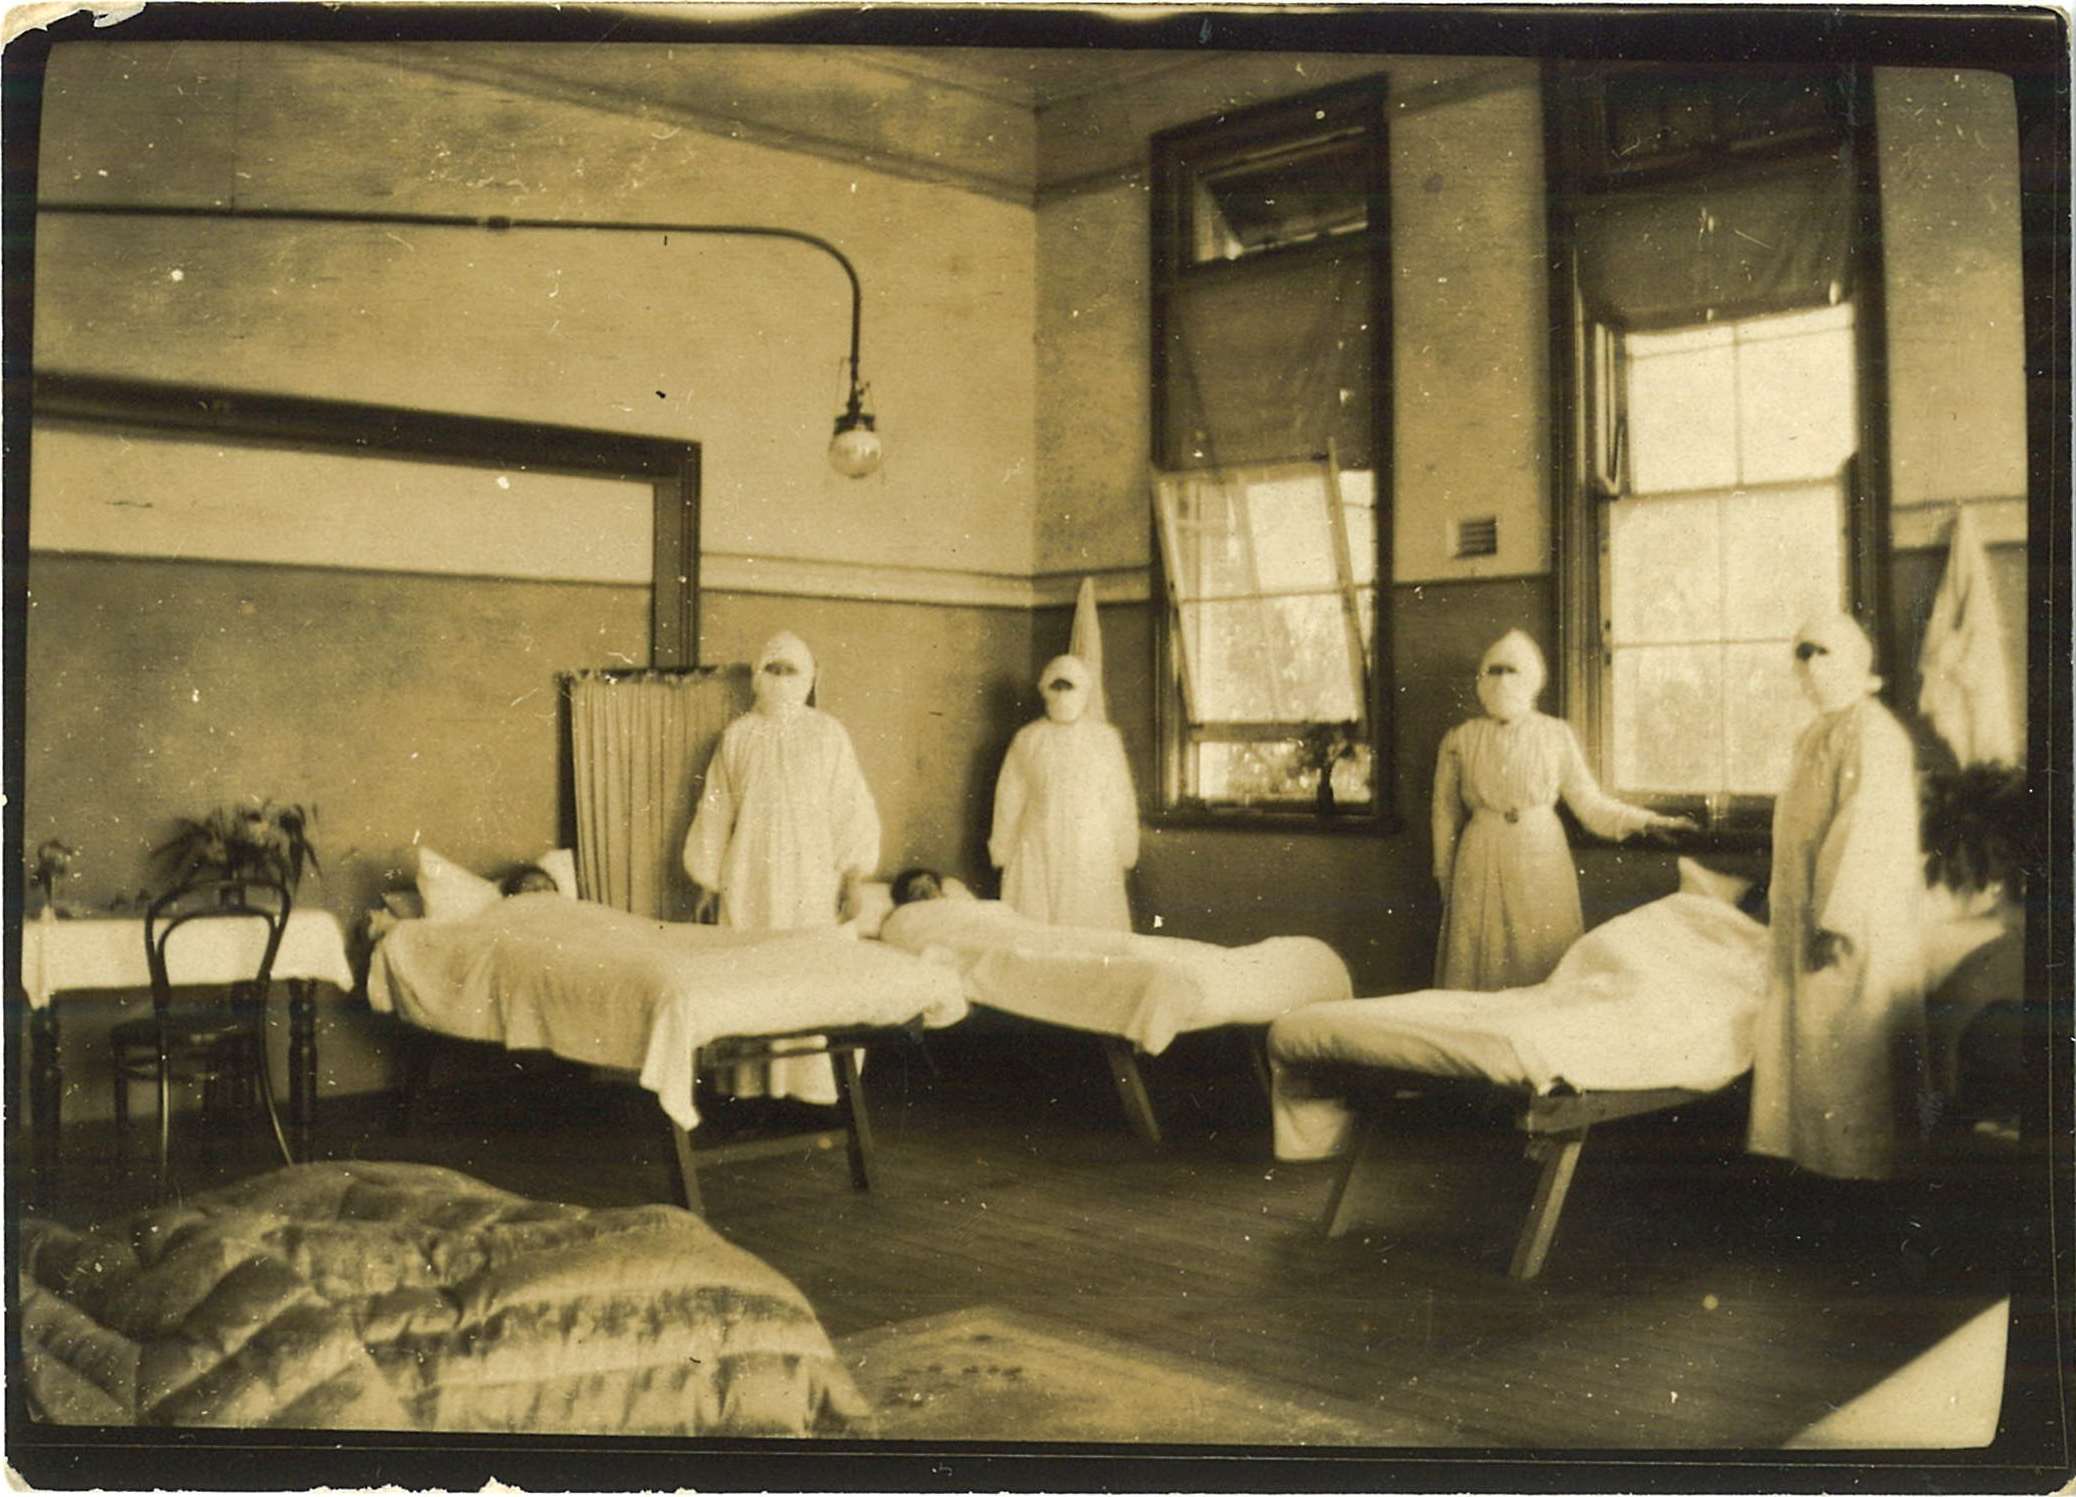 Nowra Public School convreted into a temporary hospital for pneumonic 
influenza epidemic, 1919 / photographer unknown